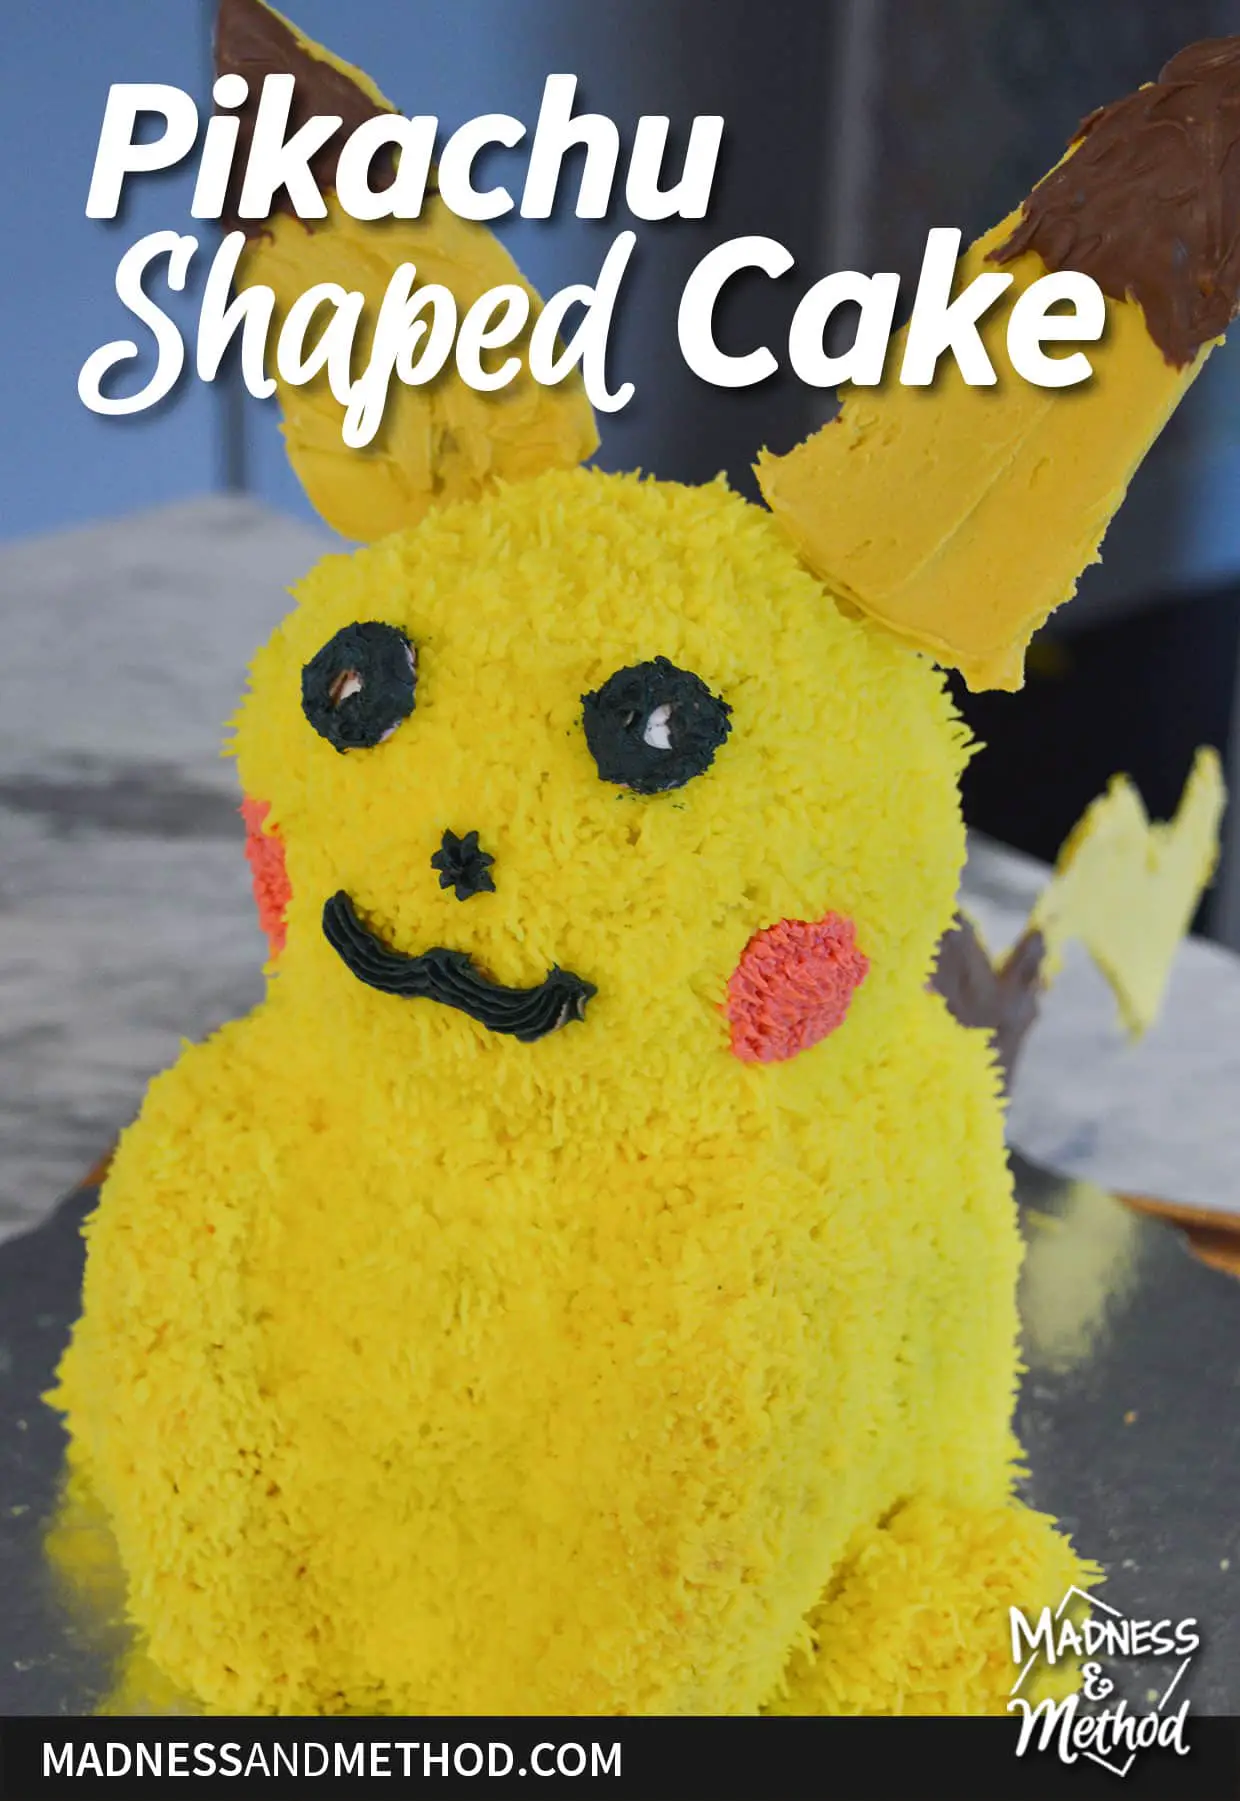 Pikachu shaped cake text overlay with cake